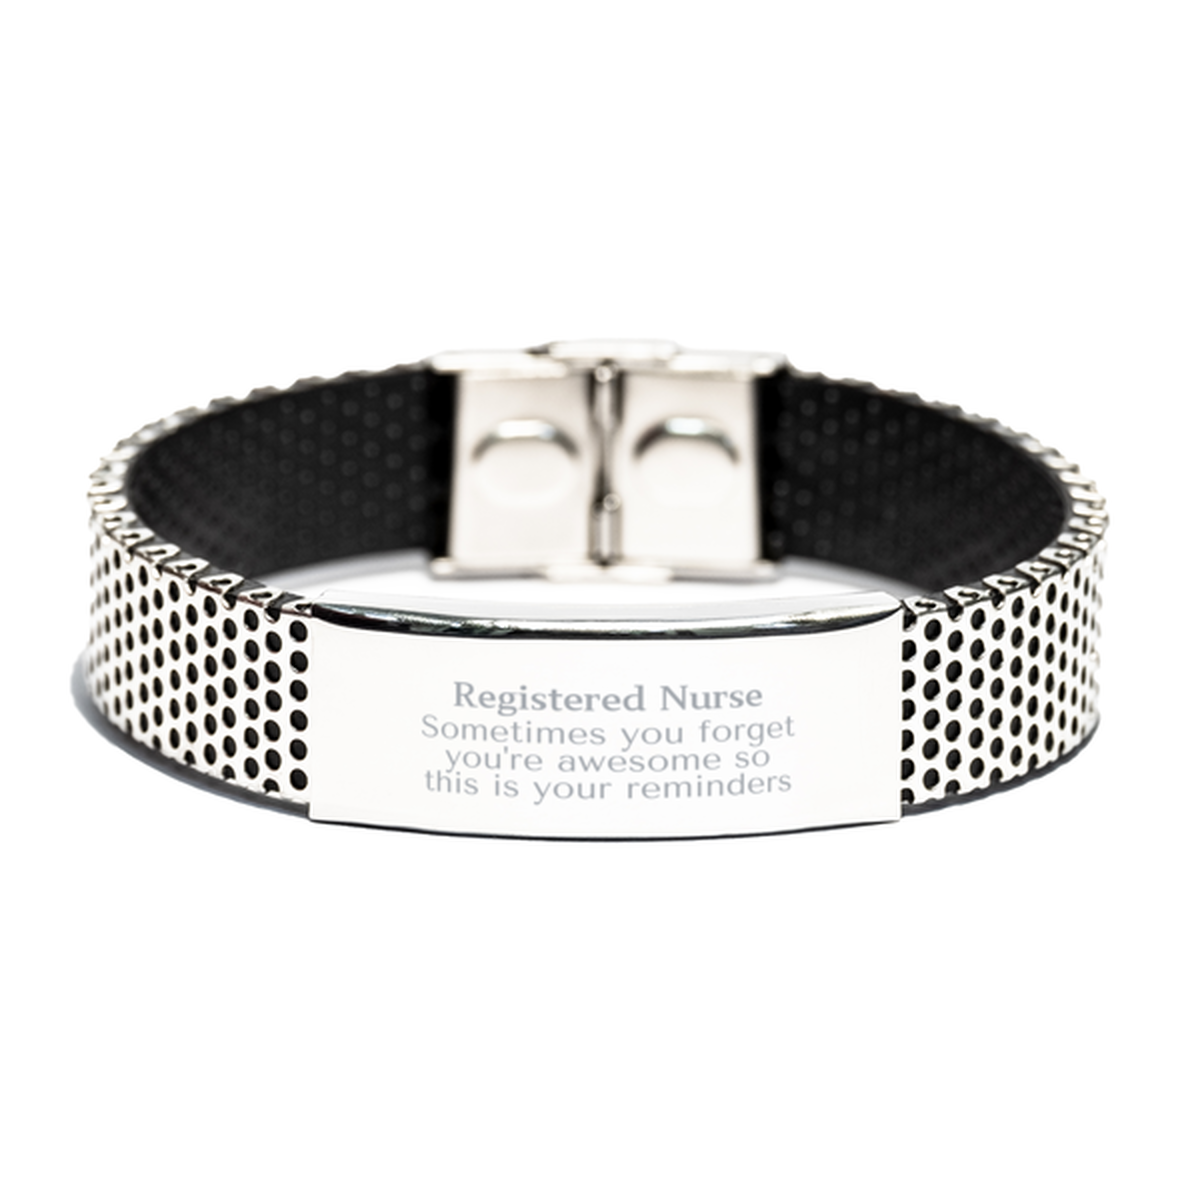 Sentimental Registered Nurse Stainless Steel Bracelet, Registered Nurse Sometimes you forget you're awesome so this is your reminders, Graduation Christmas Birthday Gifts for Registered Nurse, Men, Women, Coworkers